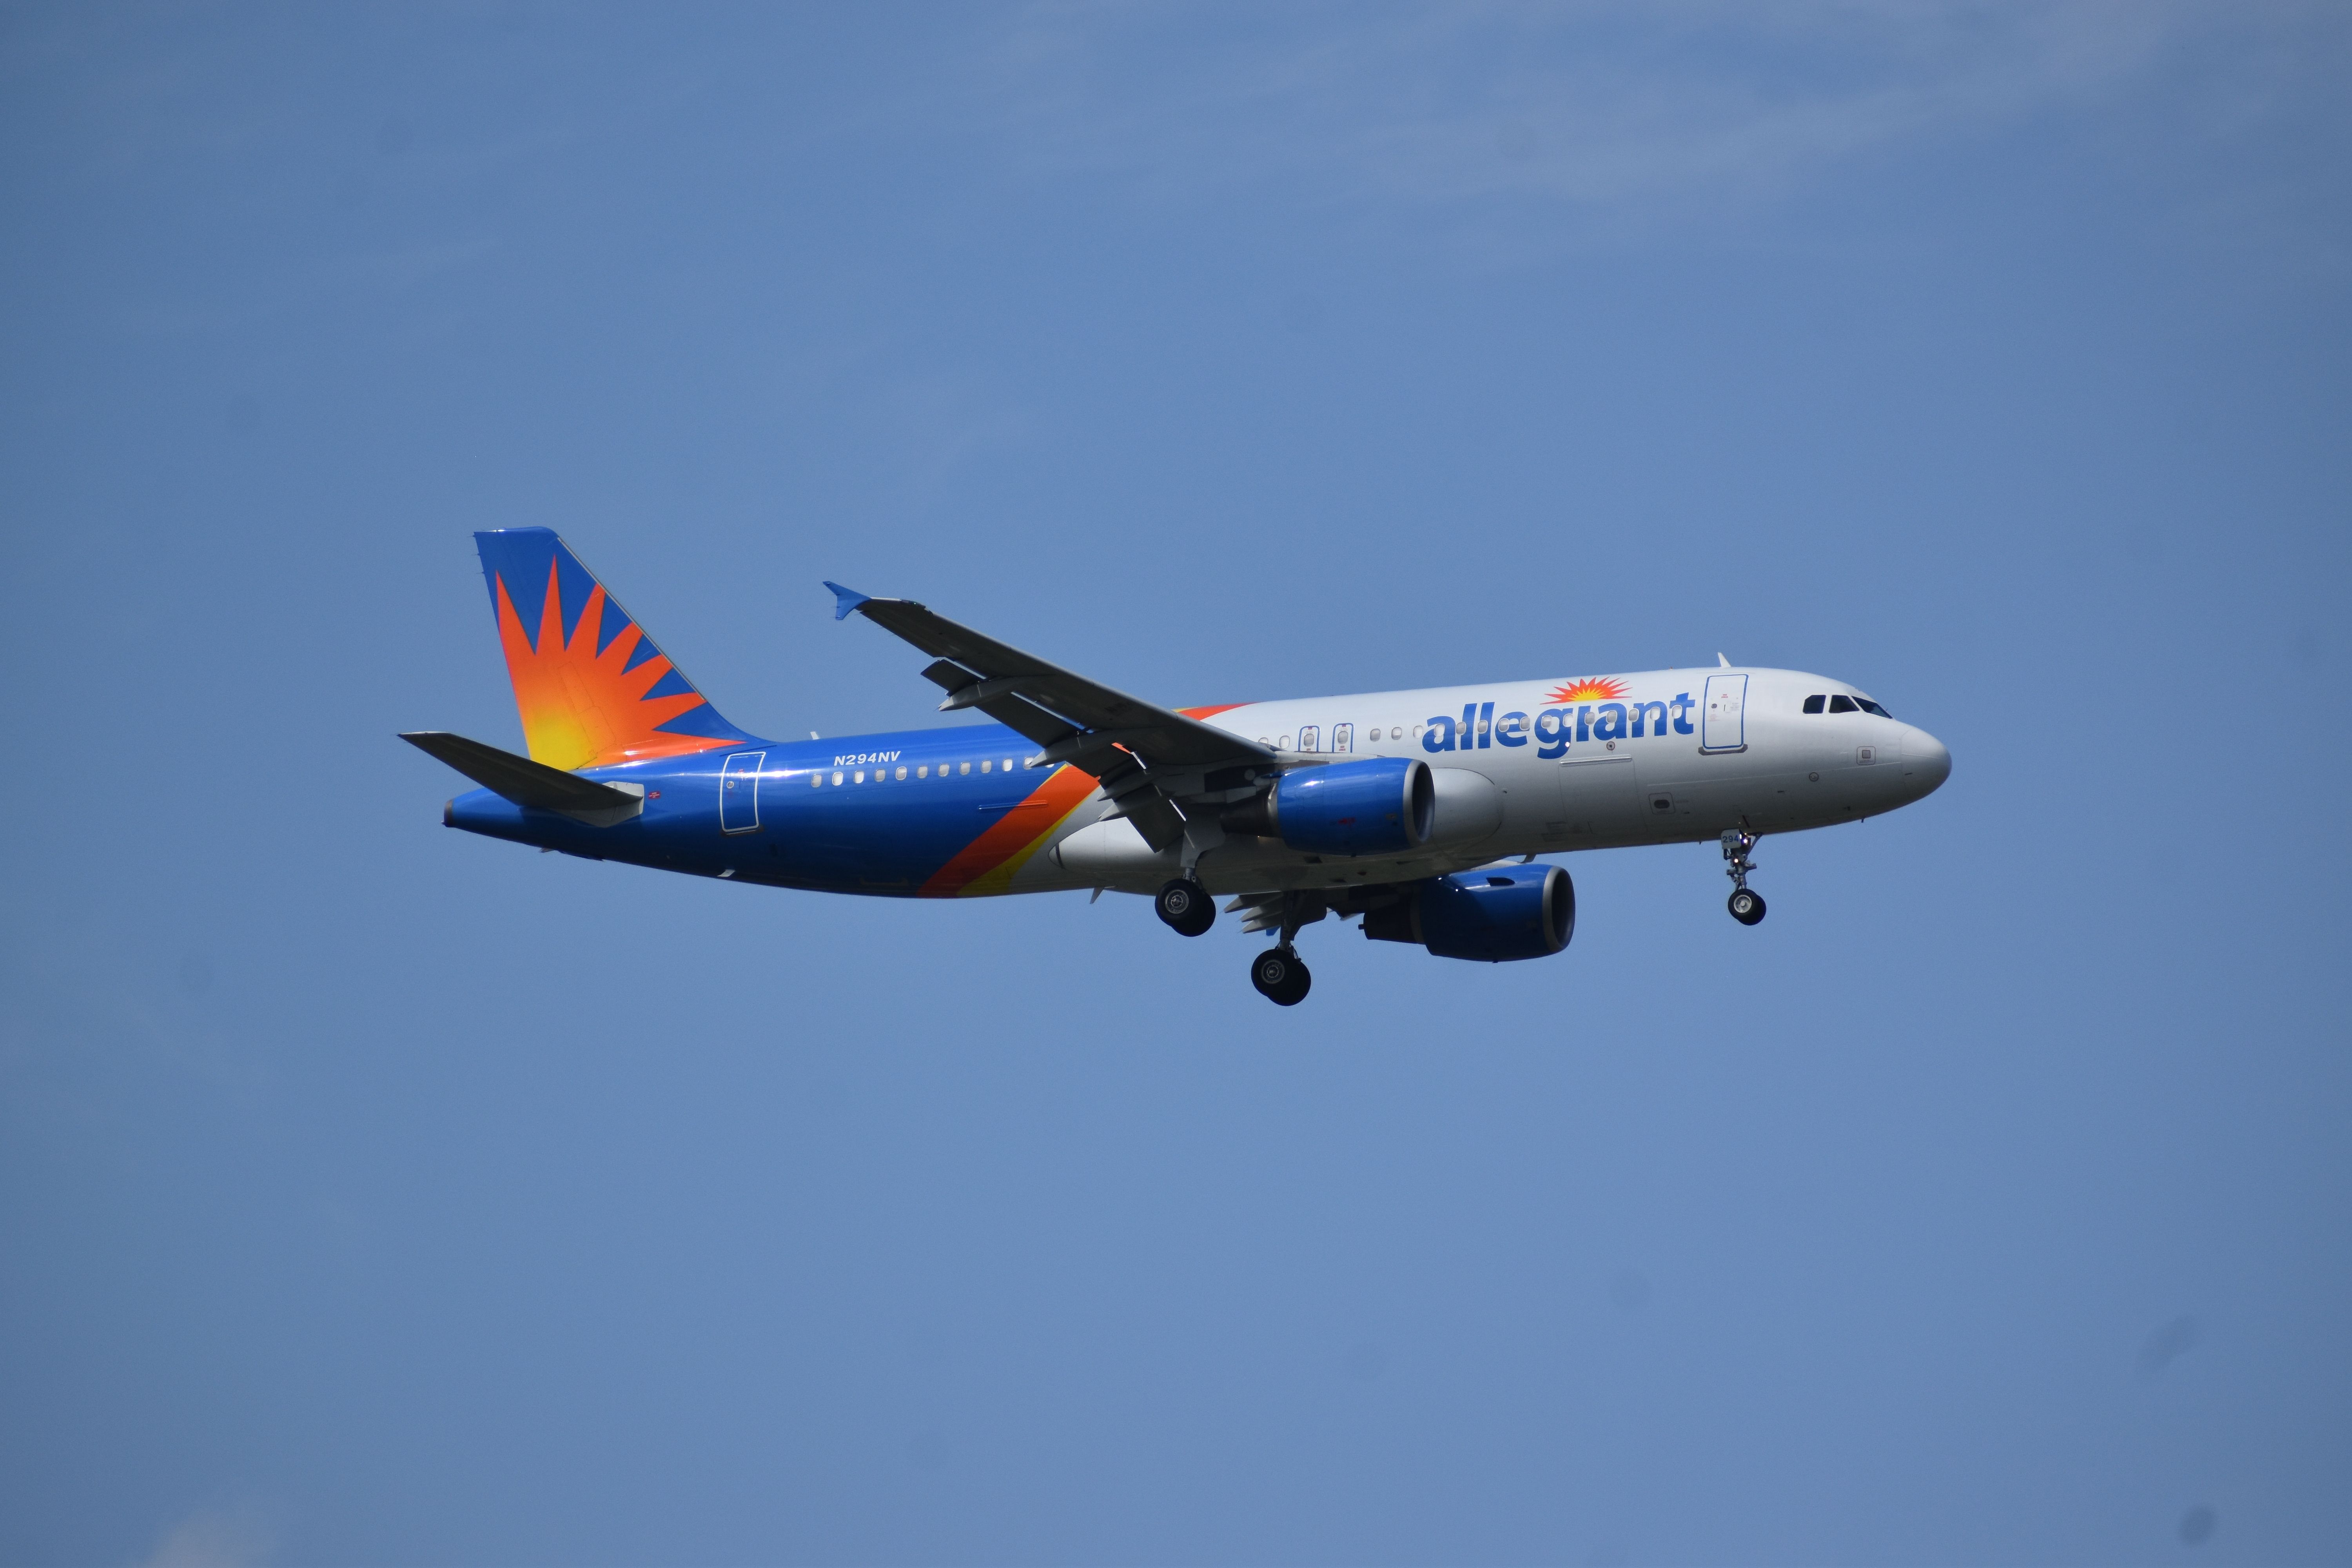 Allegiant Air's Airbus A320 lands at Houston Hobby Airport.